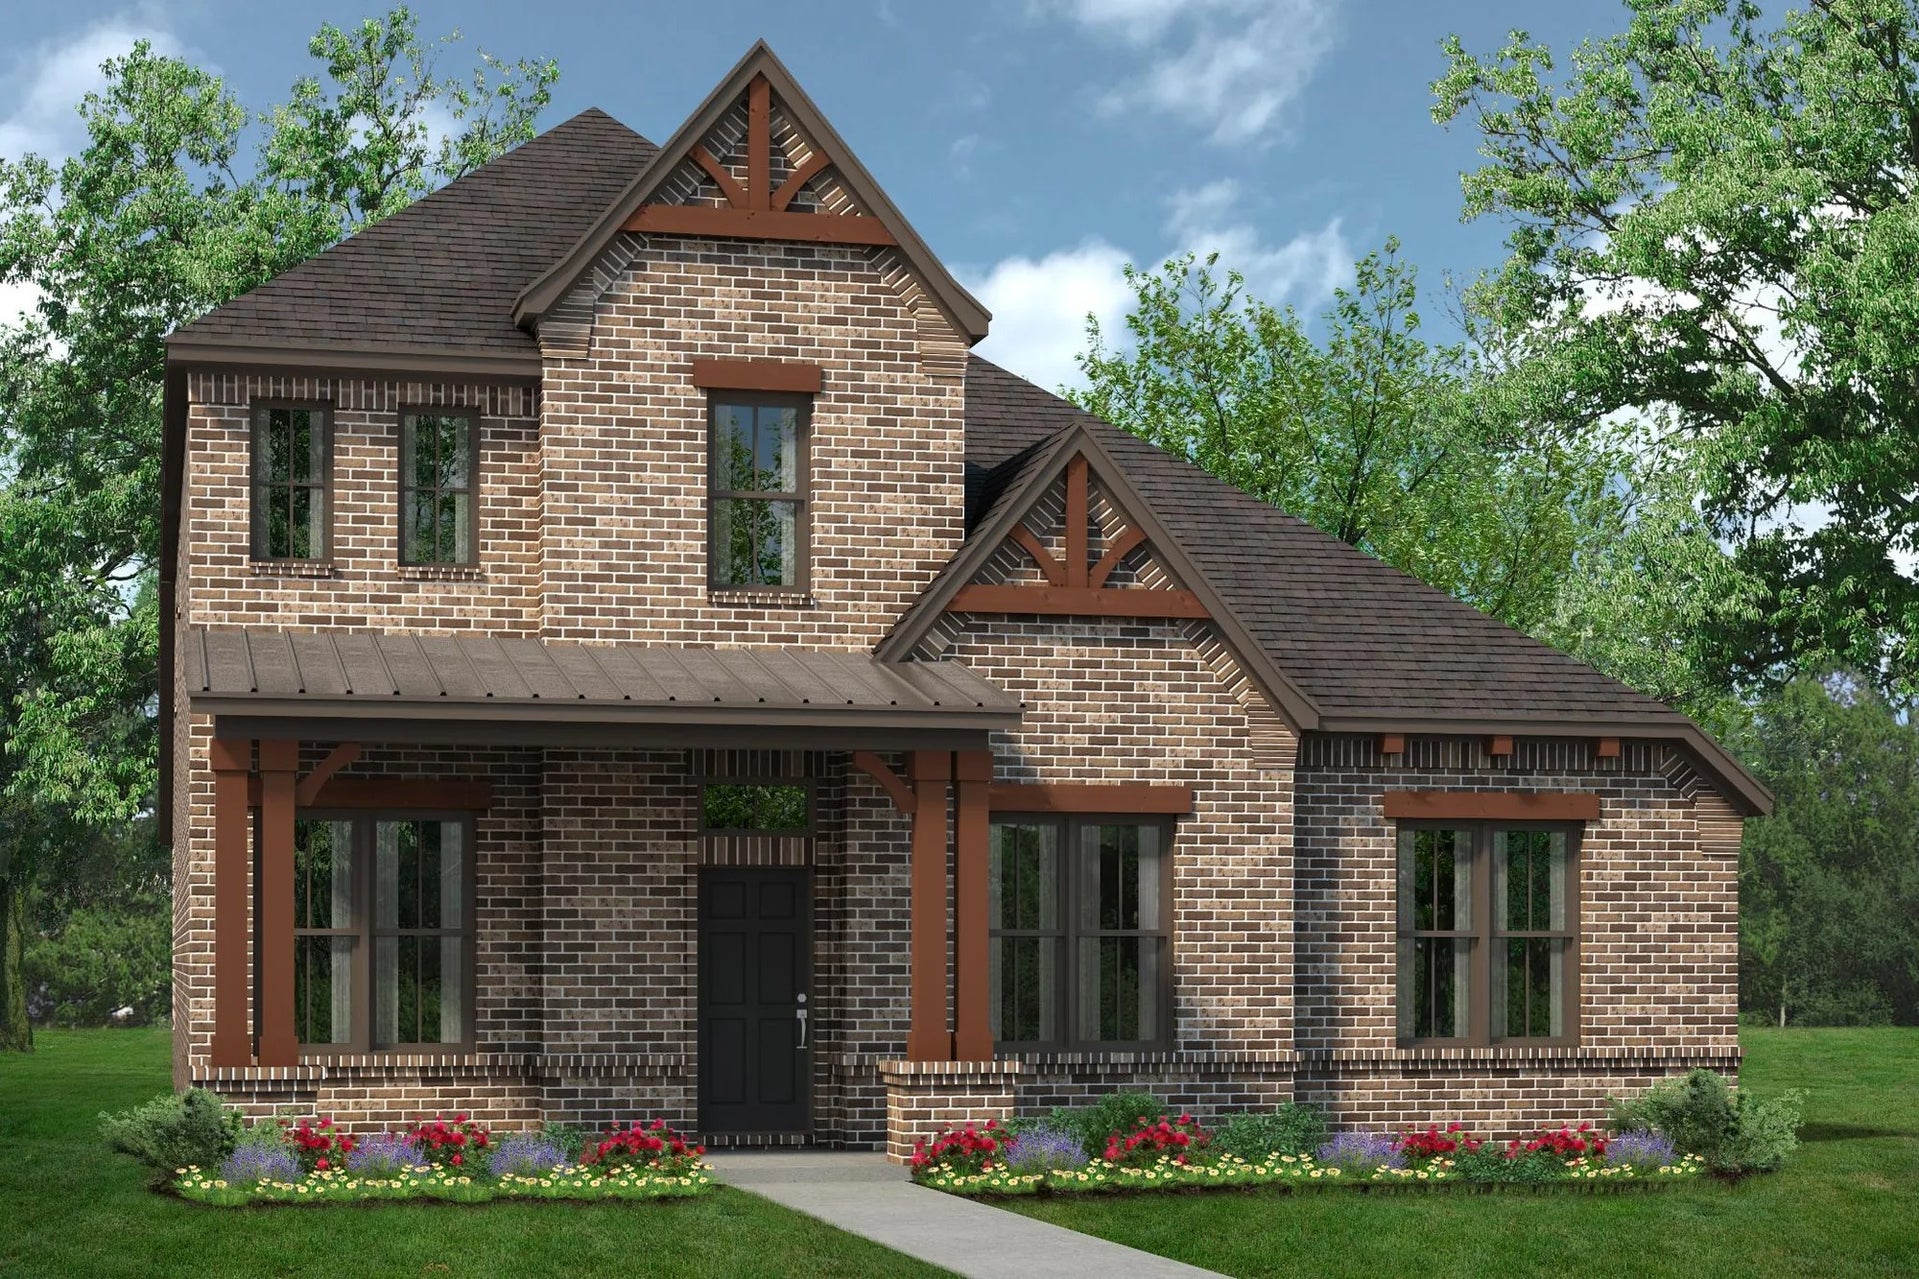 2795 D. Concept 2795 Home with 3 Bedrooms